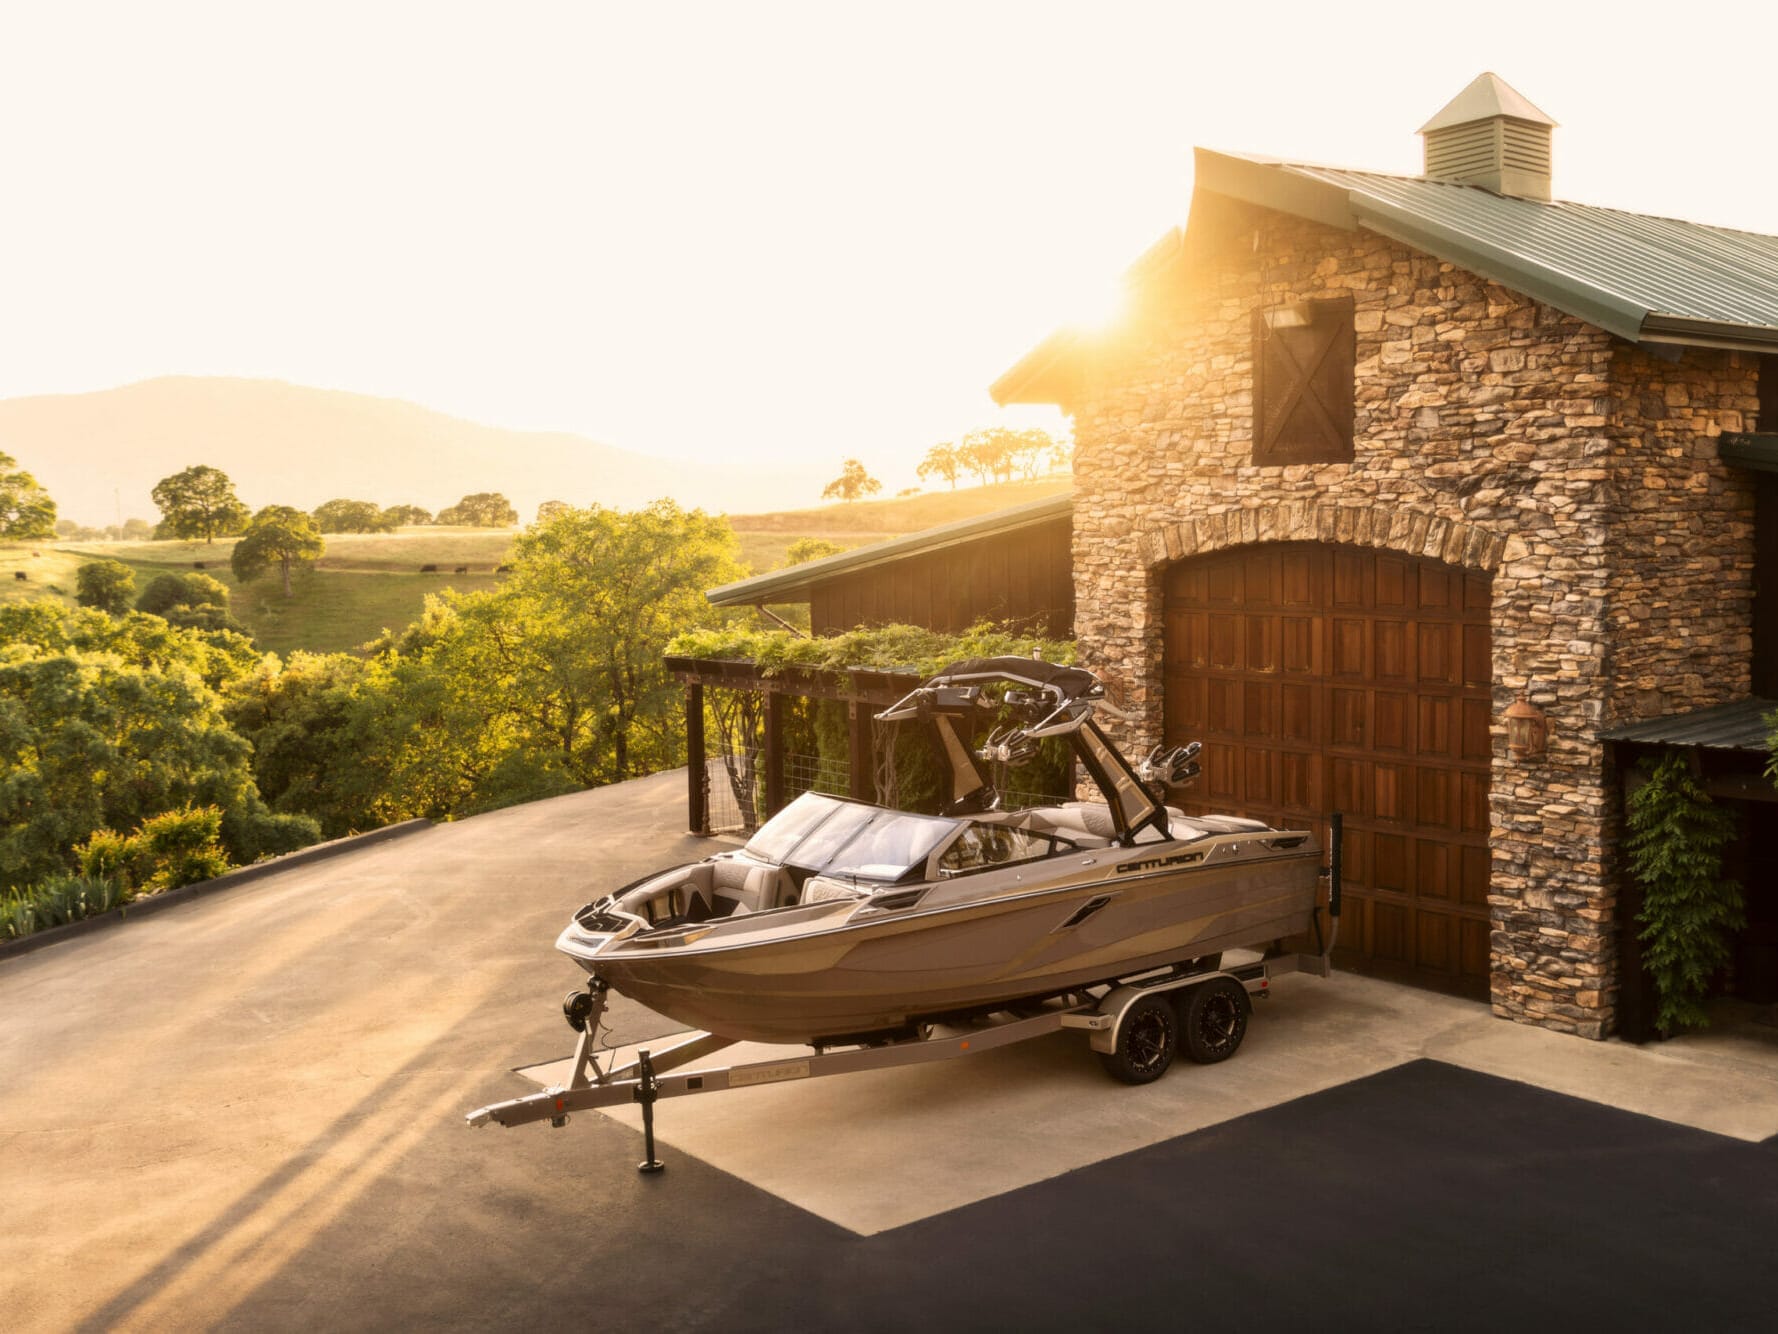 A wakesurf boat is parked in front of a barn.